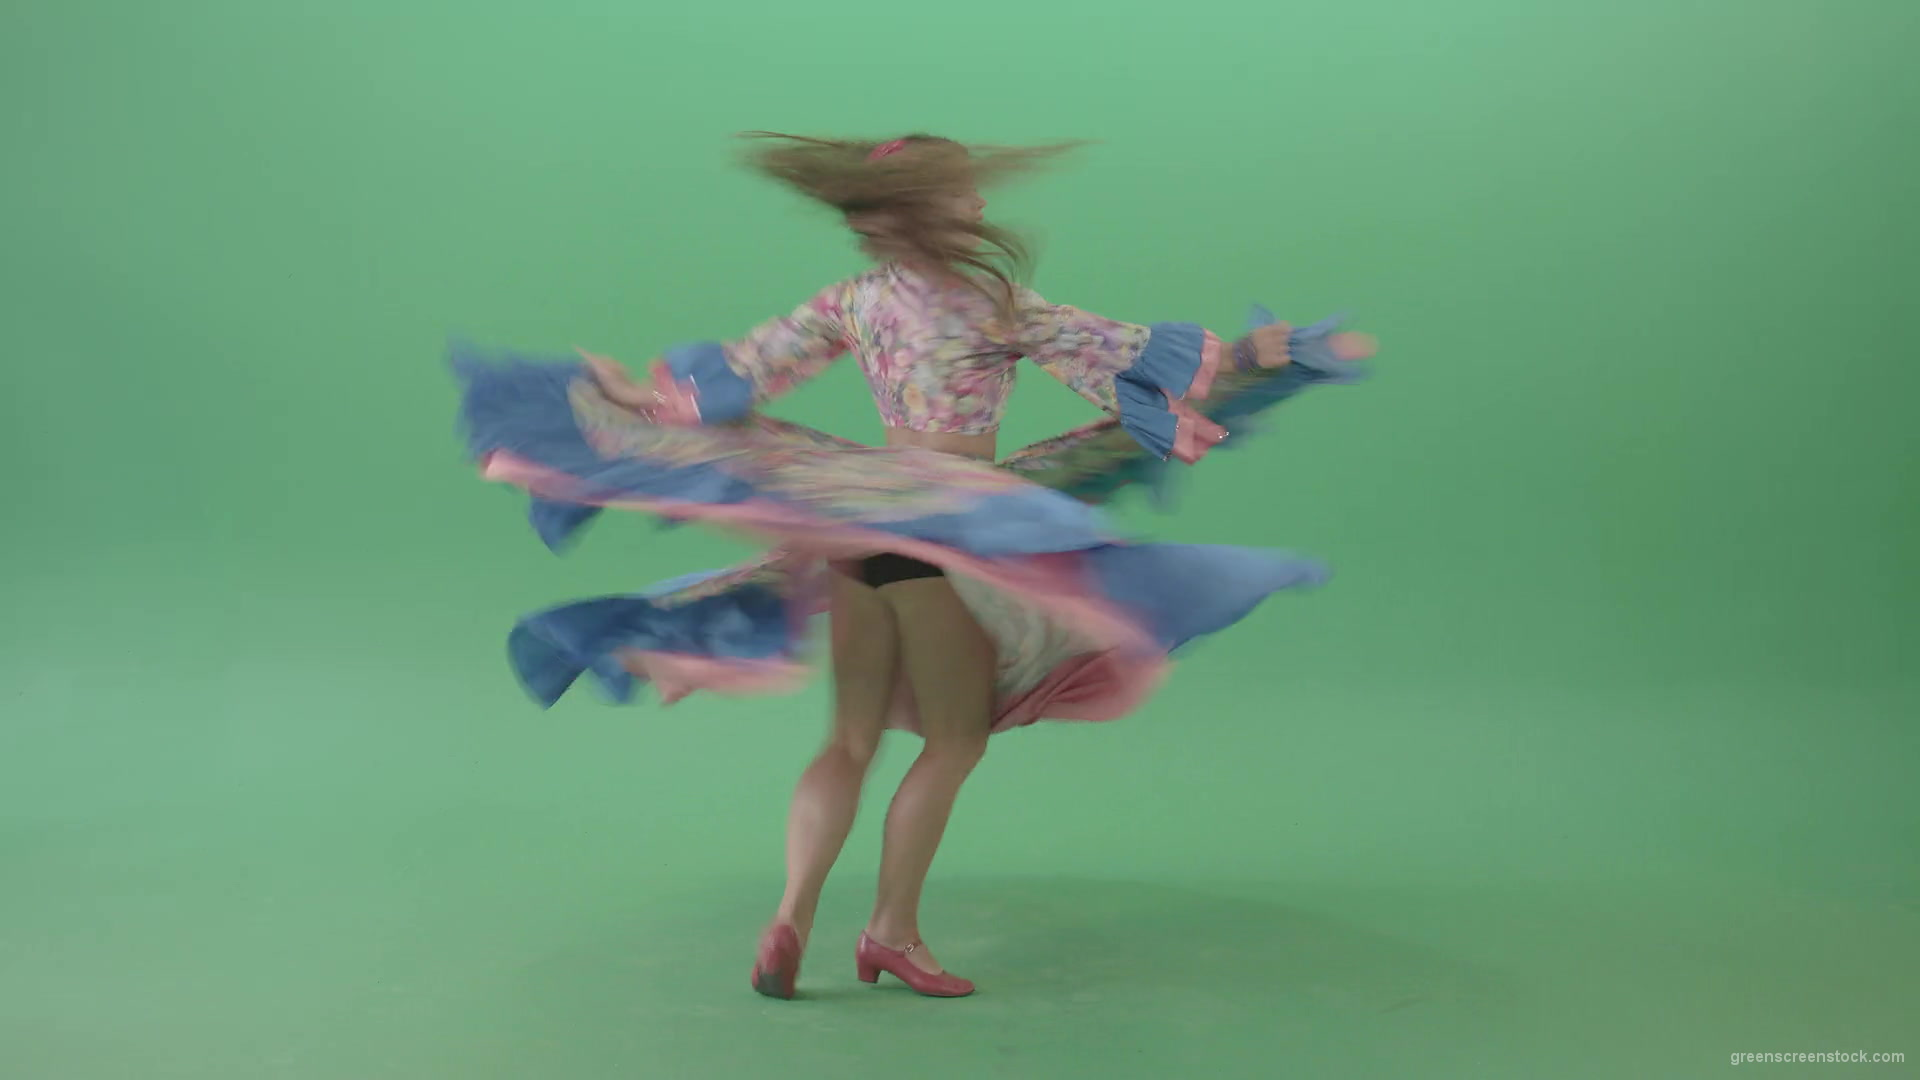 Balkan-Gipsy-Girl-spinning-and-dance-isolated-on-Green-Screen-4K-Video-Footage-1920_002 Green Screen Stock